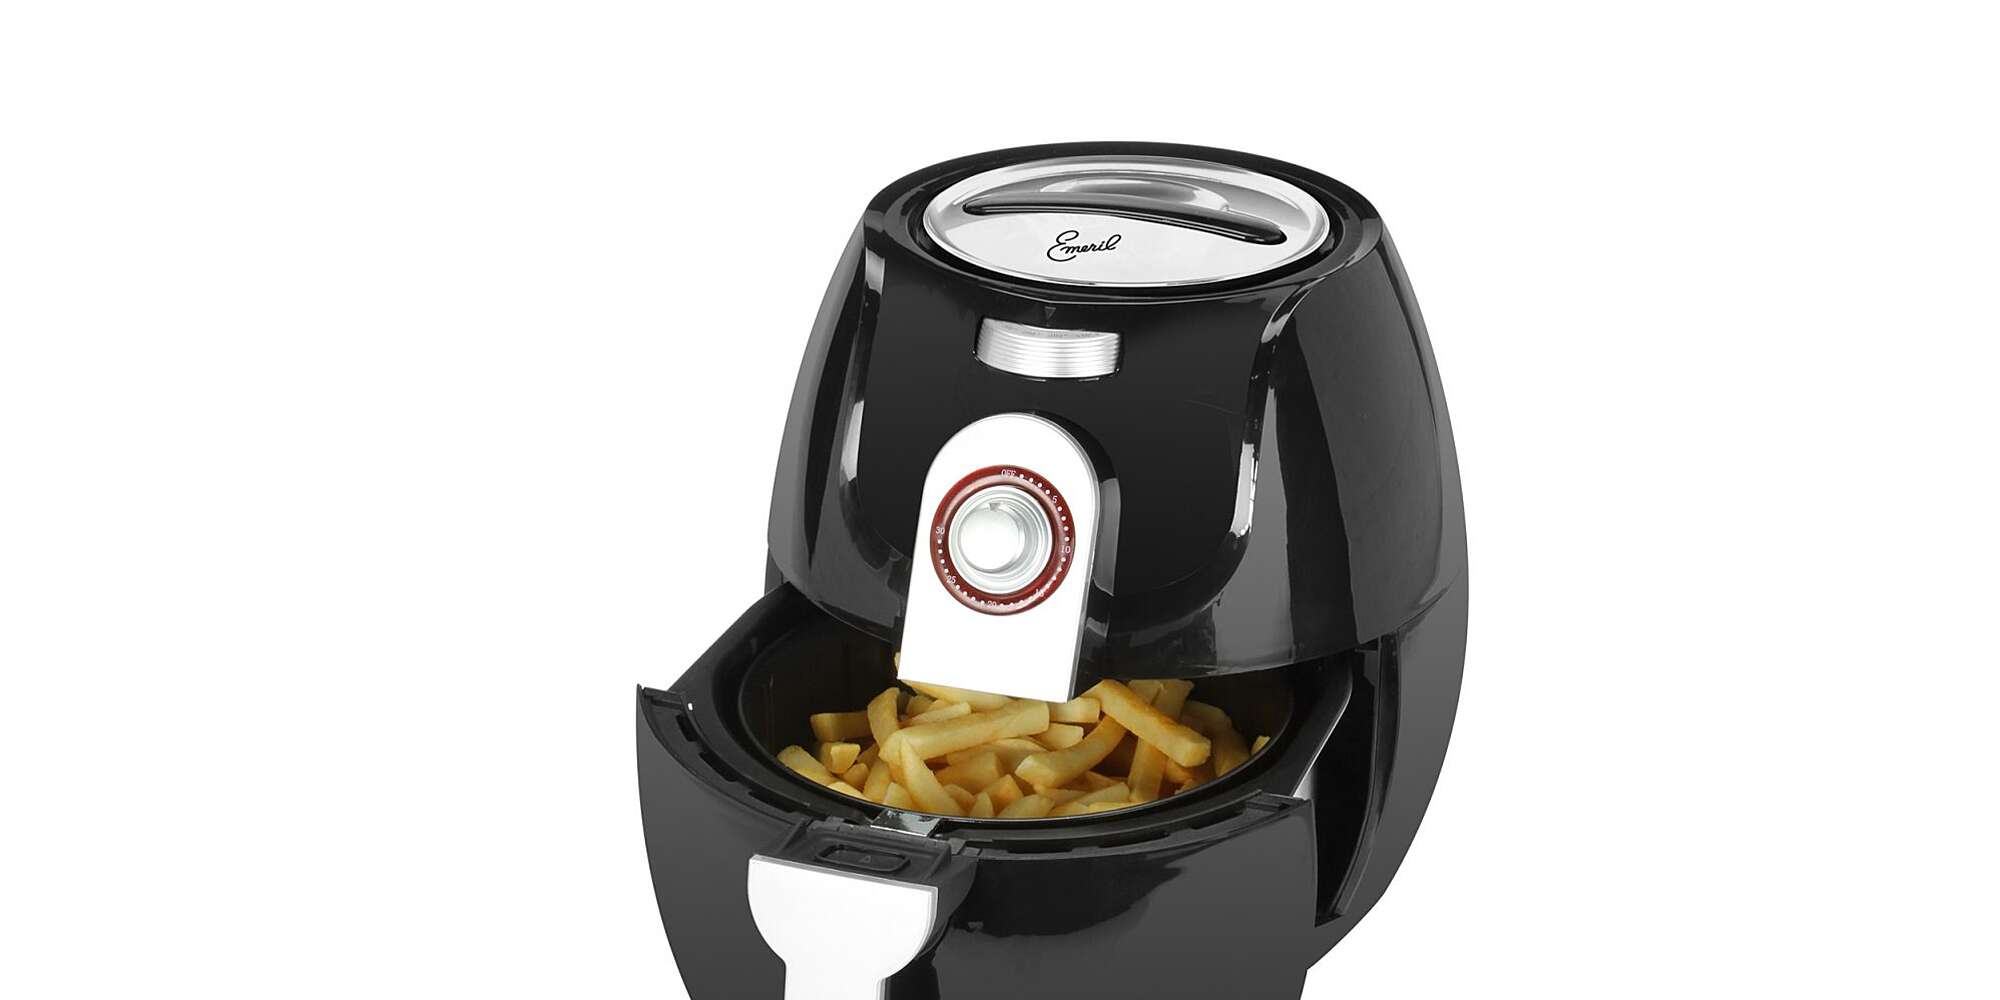 Emeril Lagasse Pressure Cooker & Air Fryer by unknown author